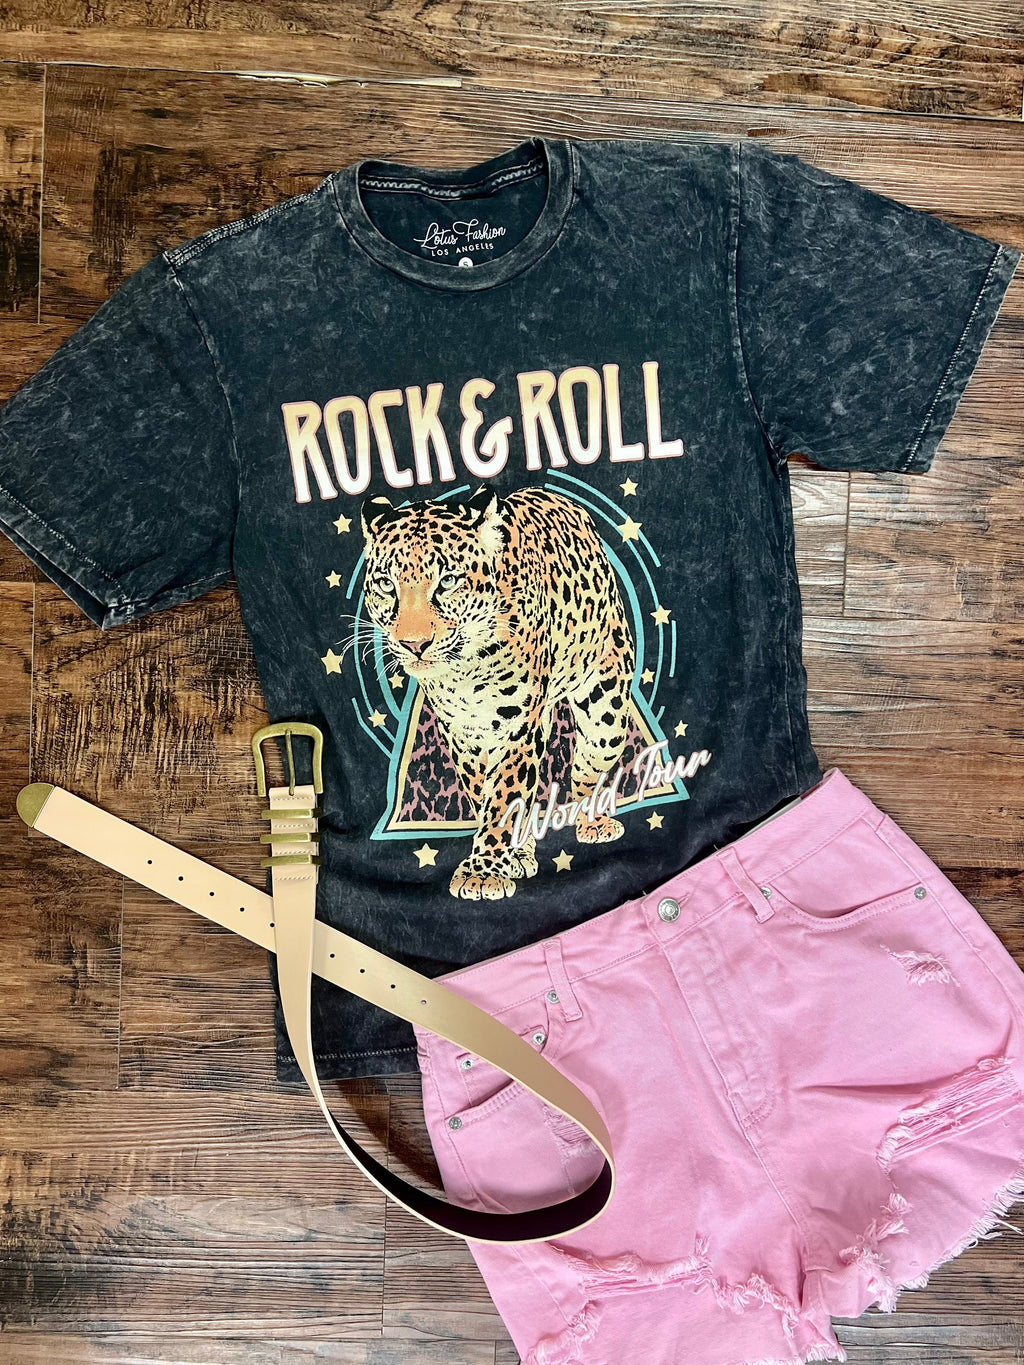 Inspired by music and the legacy of rock and roll, this Mineral Washed Tee is crafted from soft, breathable 100% cotton for a comfortably stylish look. The classic short-sleeve, crew neck silhouette is loose fitting, allowing you to move unrestricted, while its unique mineral wash provides an effortlessly cool, lived-in look and feel, perfect for your own rock and roll world tour.